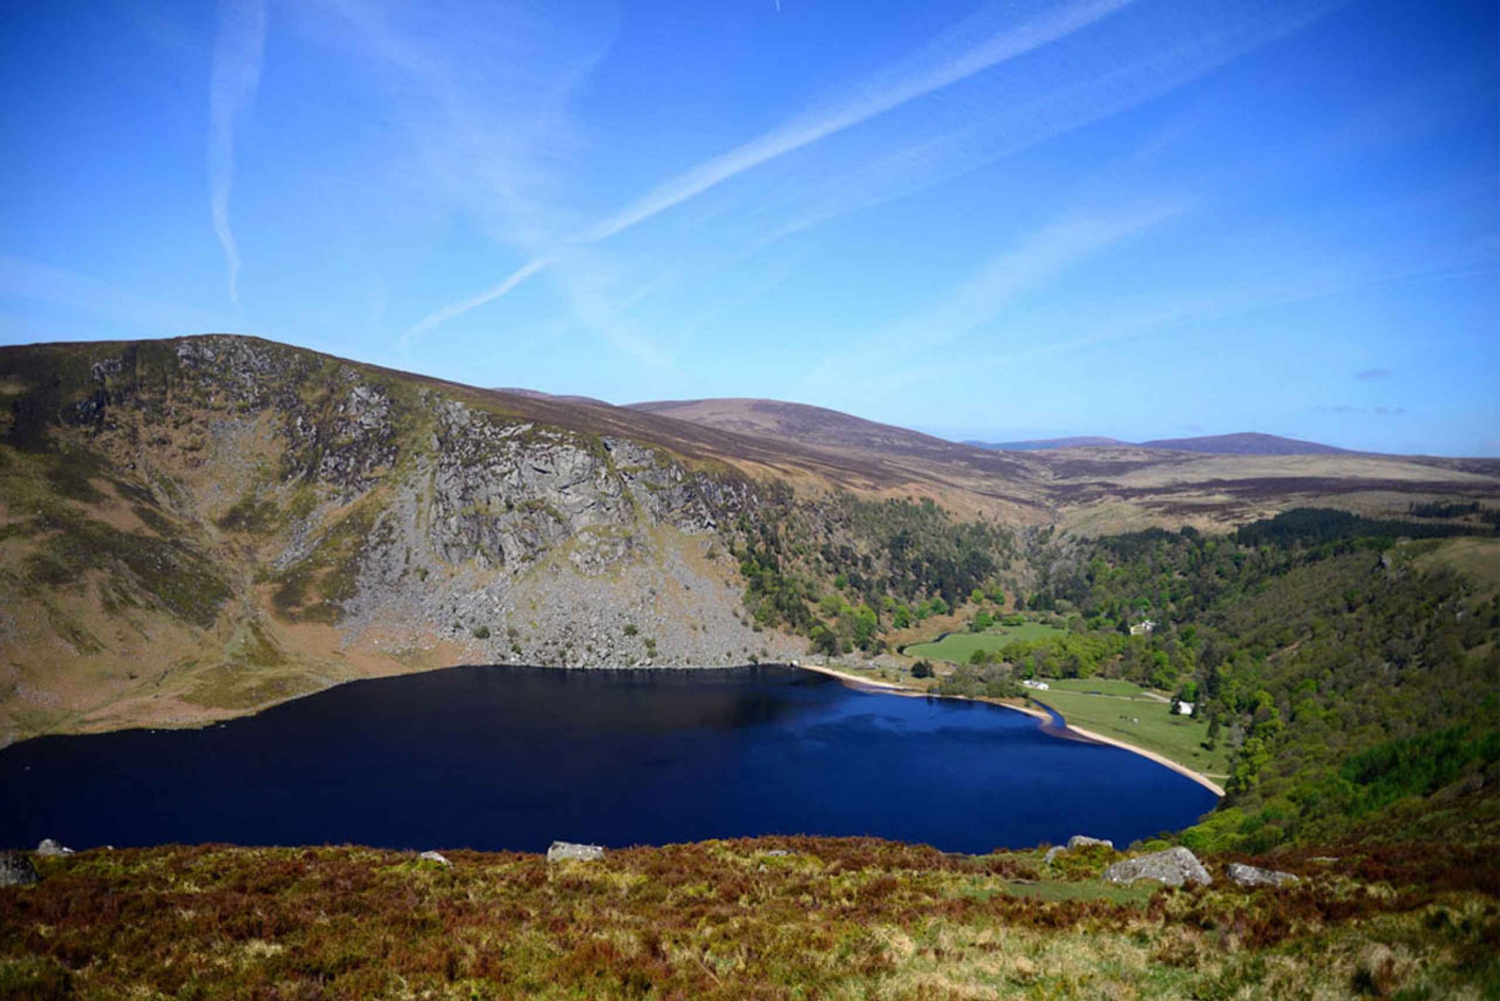 Day Tour of Wicklow Mountains National Park from Dublin